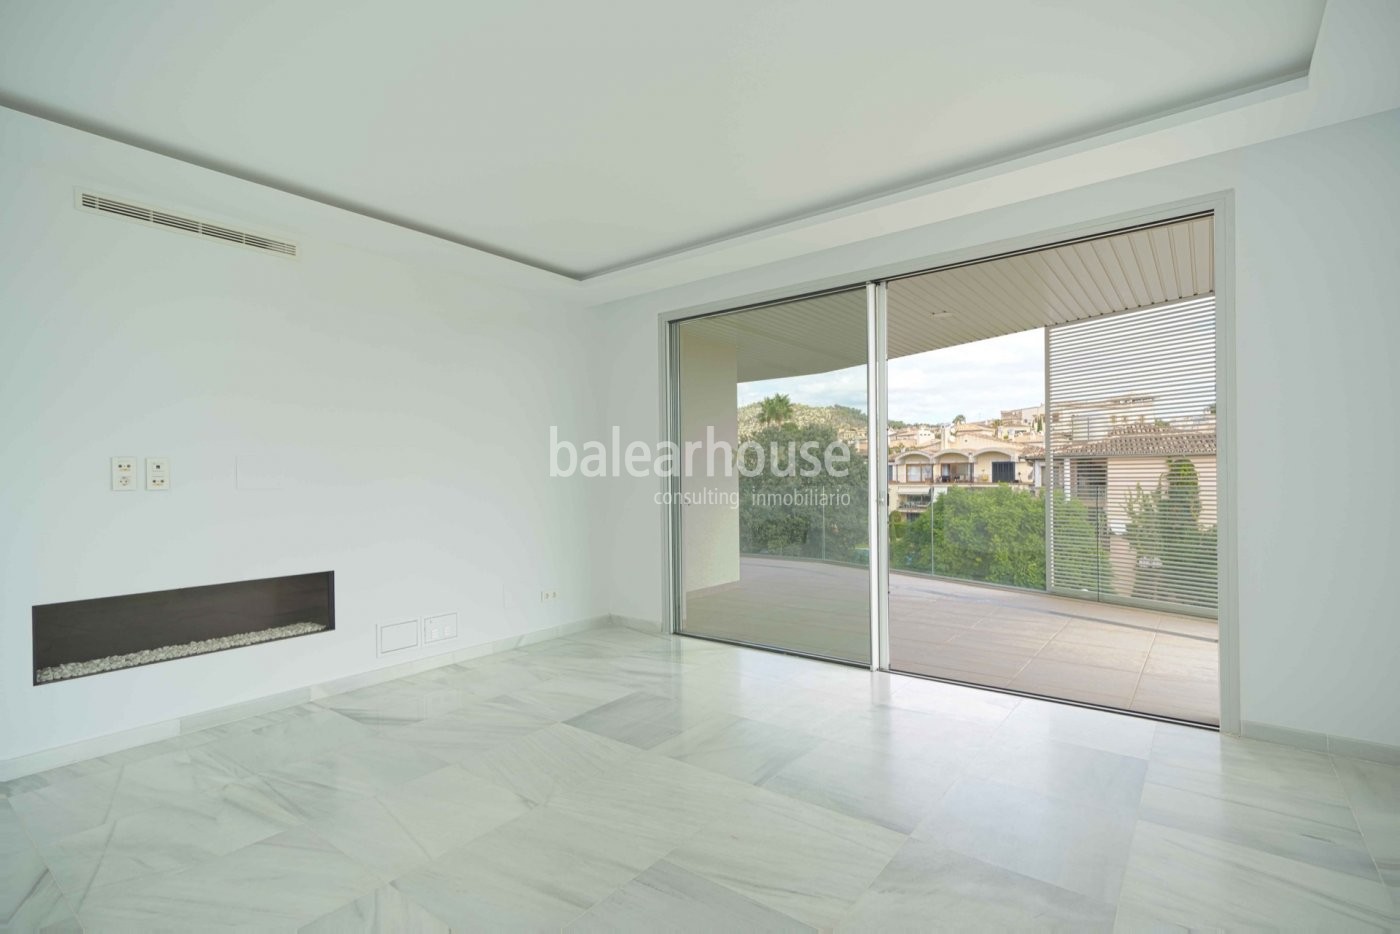 Living surrounded by golf, nature and high qualities in Palma.